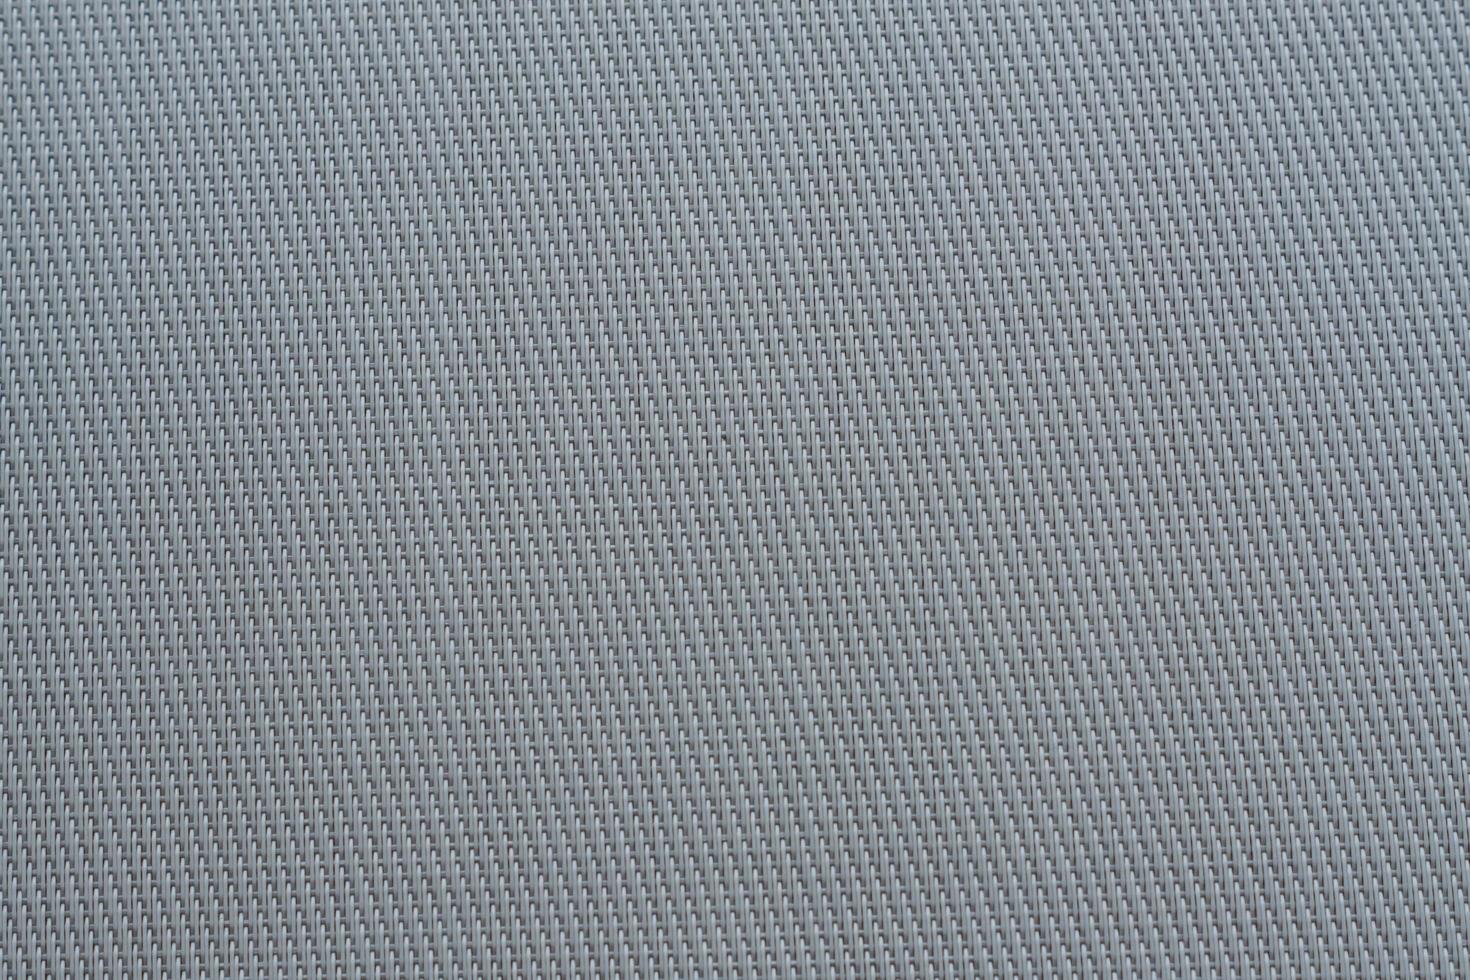 Surface of grey wicker texture background 9979356 Stock Photo at Vecteezy